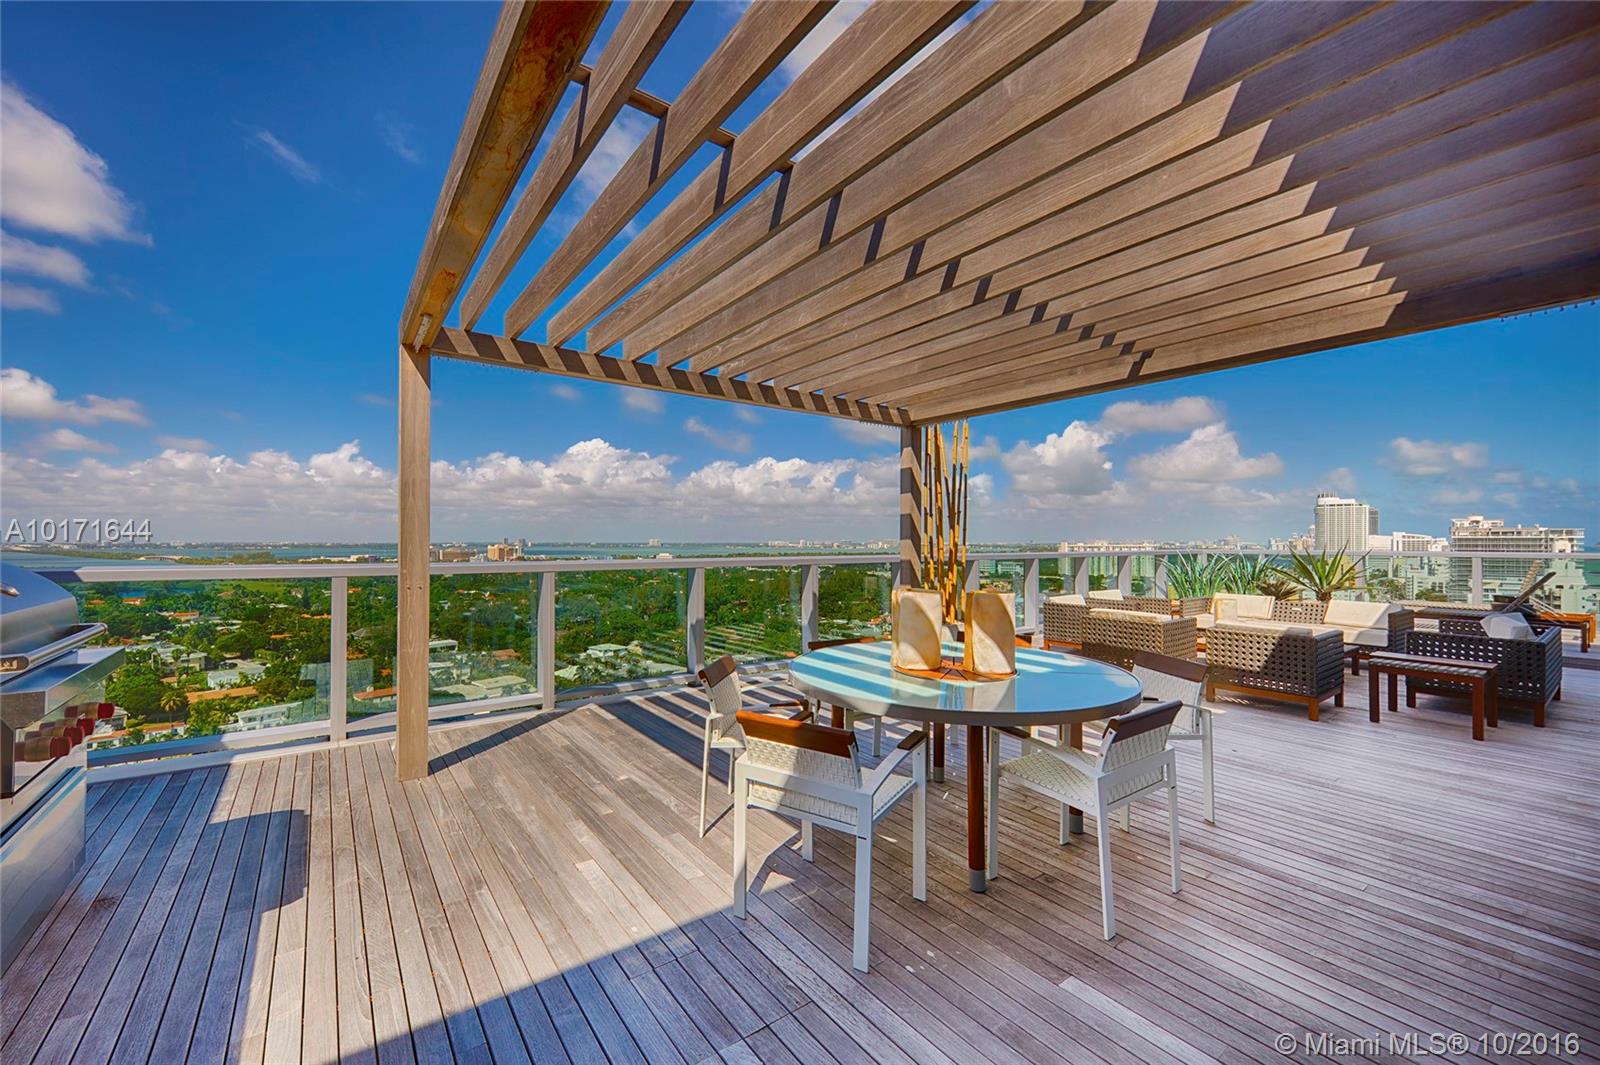 2901 Collins Ave # 1602 Miami Beach, FL 33140 - $22,000,000 home for sale, house images, photos and pics gallery